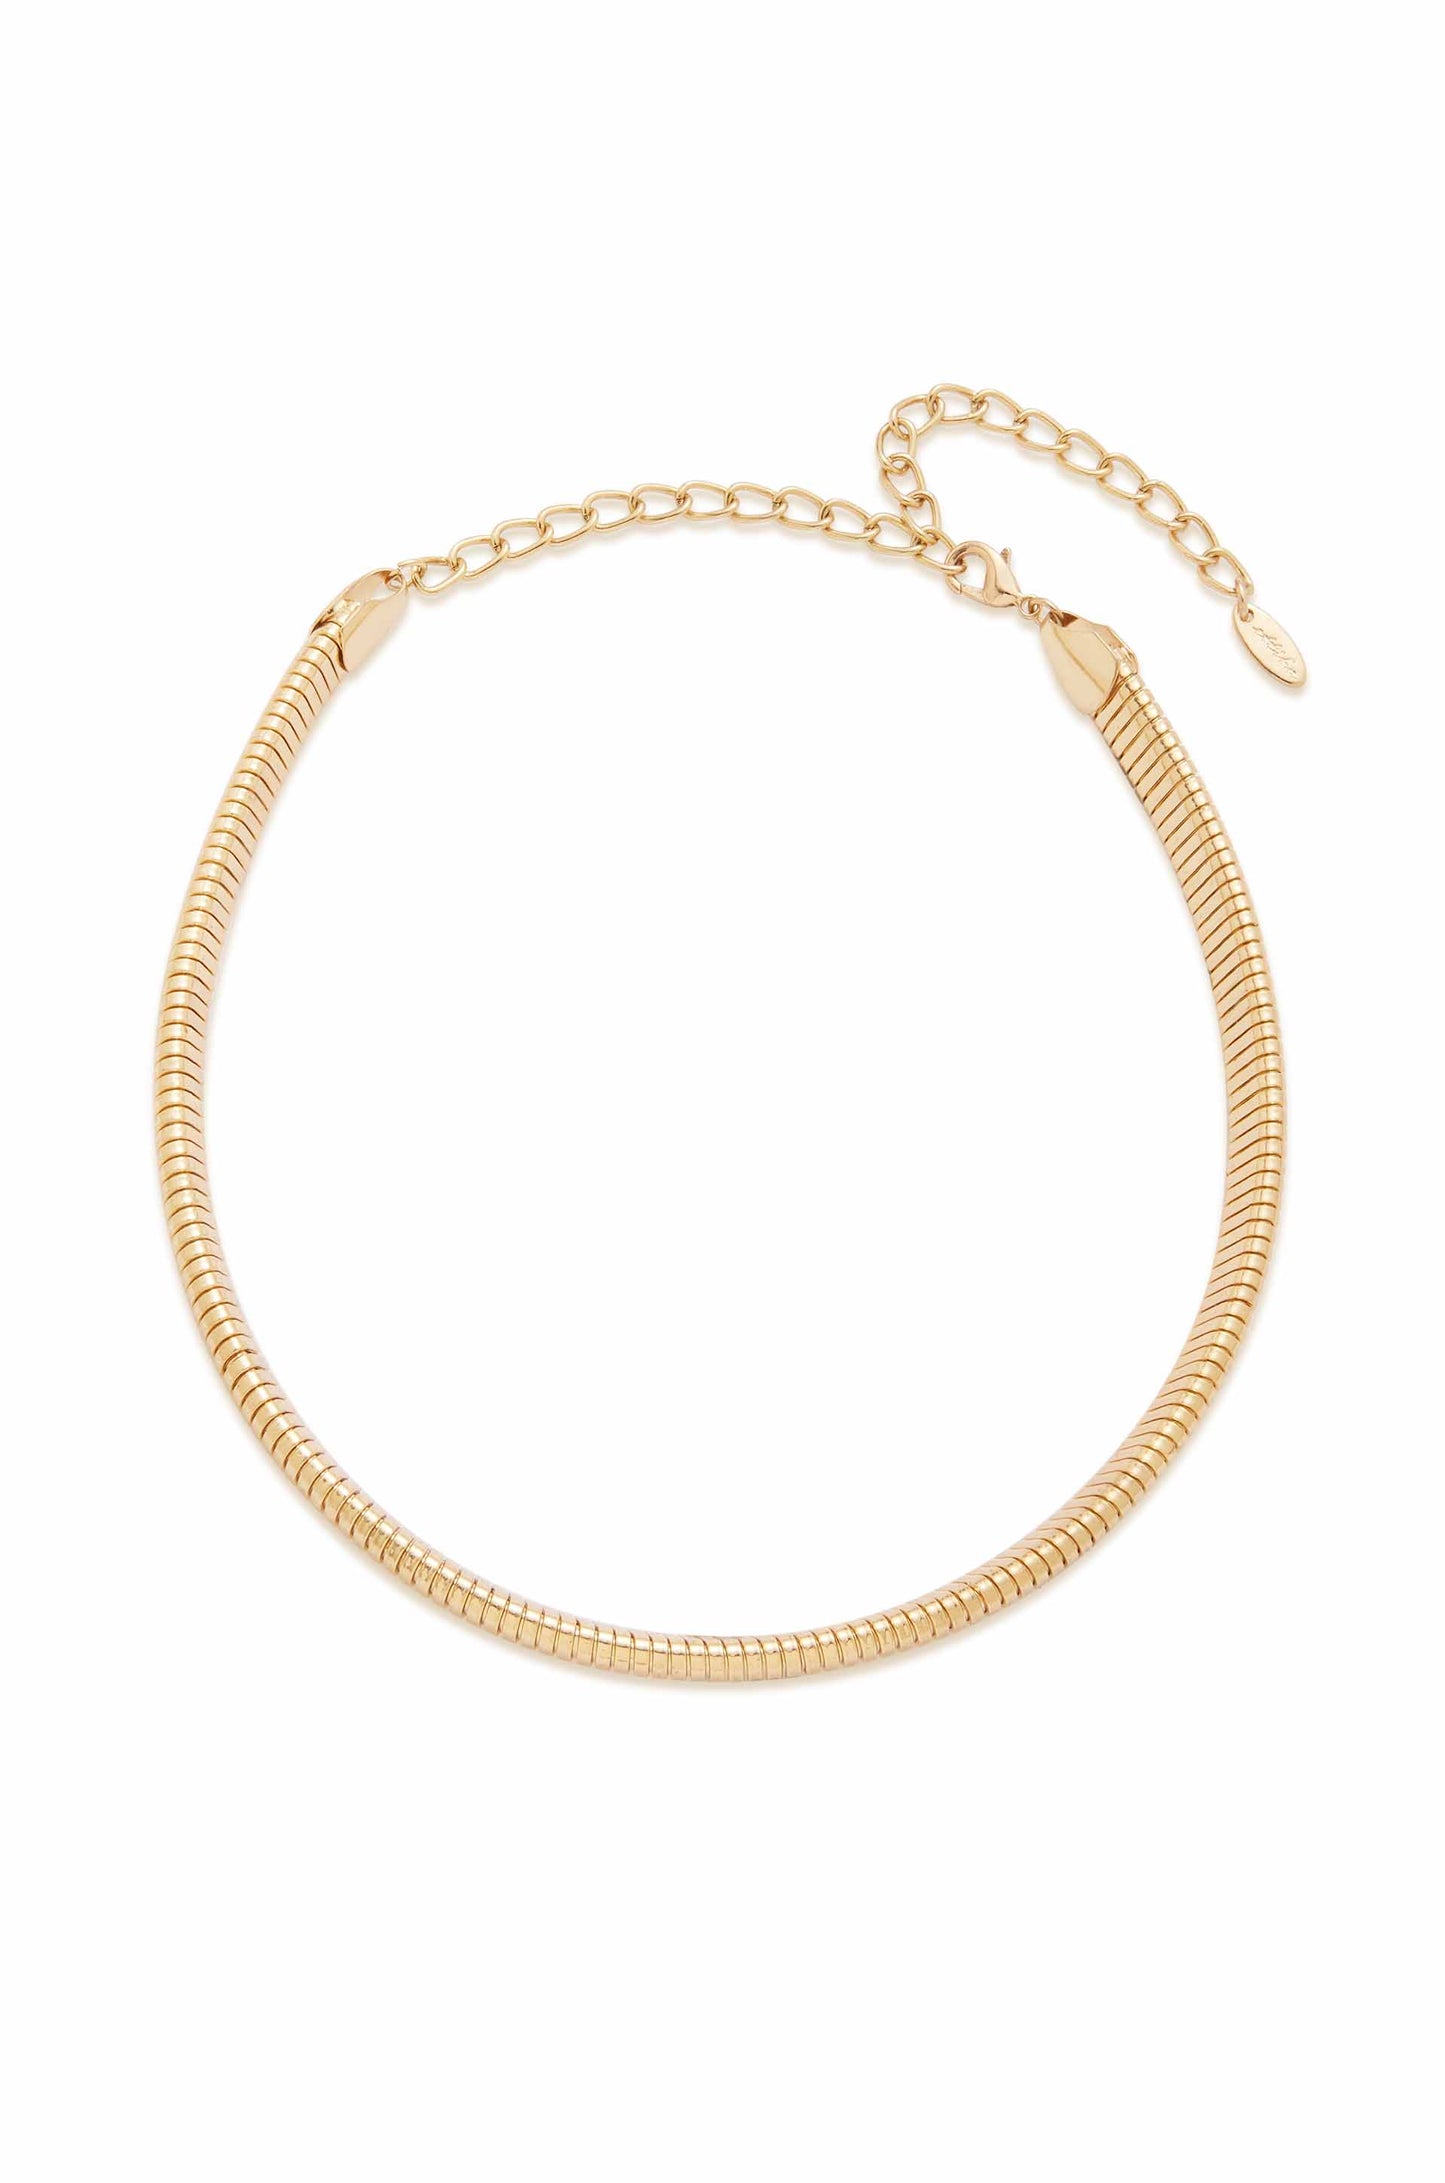 Your Essential Flex Snake Chain 18k Gold Plated Necklace on white